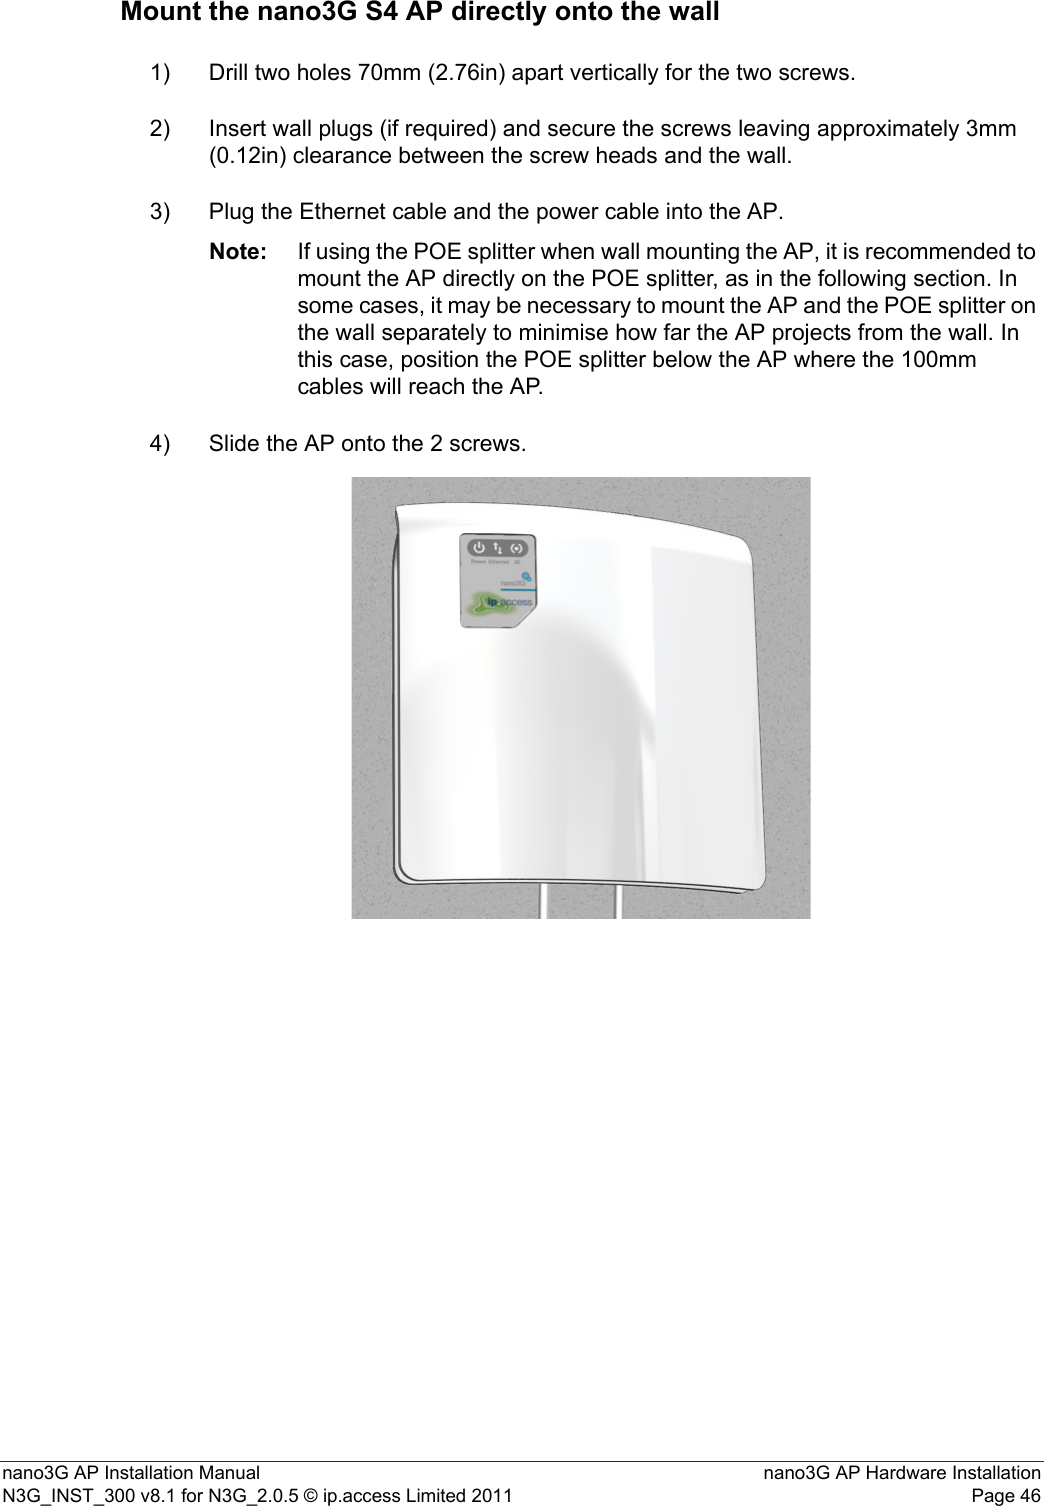 nano3G AP Installation Manual nano3G AP Hardware InstallationN3G_INST_300 v8.1 for N3G_2.0.5 © ip.access Limited 2011 Page 46Mount the nano3G S4 AP directly onto the wall1) Drill two holes 70mm (2.76in) apart vertically for the two screws.2) Insert wall plugs (if required) and secure the screws leaving approximately 3mm (0.12in) clearance between the screw heads and the wall.3) Plug the Ethernet cable and the power cable into the AP.Note: If using the POE splitter when wall mounting the AP, it is recommended to mount the AP directly on the POE splitter, as in the following section. In some cases, it may be necessary to mount the AP and the POE splitter on the wall separately to minimise how far the AP projects from the wall. In this case, position the POE splitter below the AP where the 100mm cables will reach the AP. 4) Slide the AP onto the 2 screws.